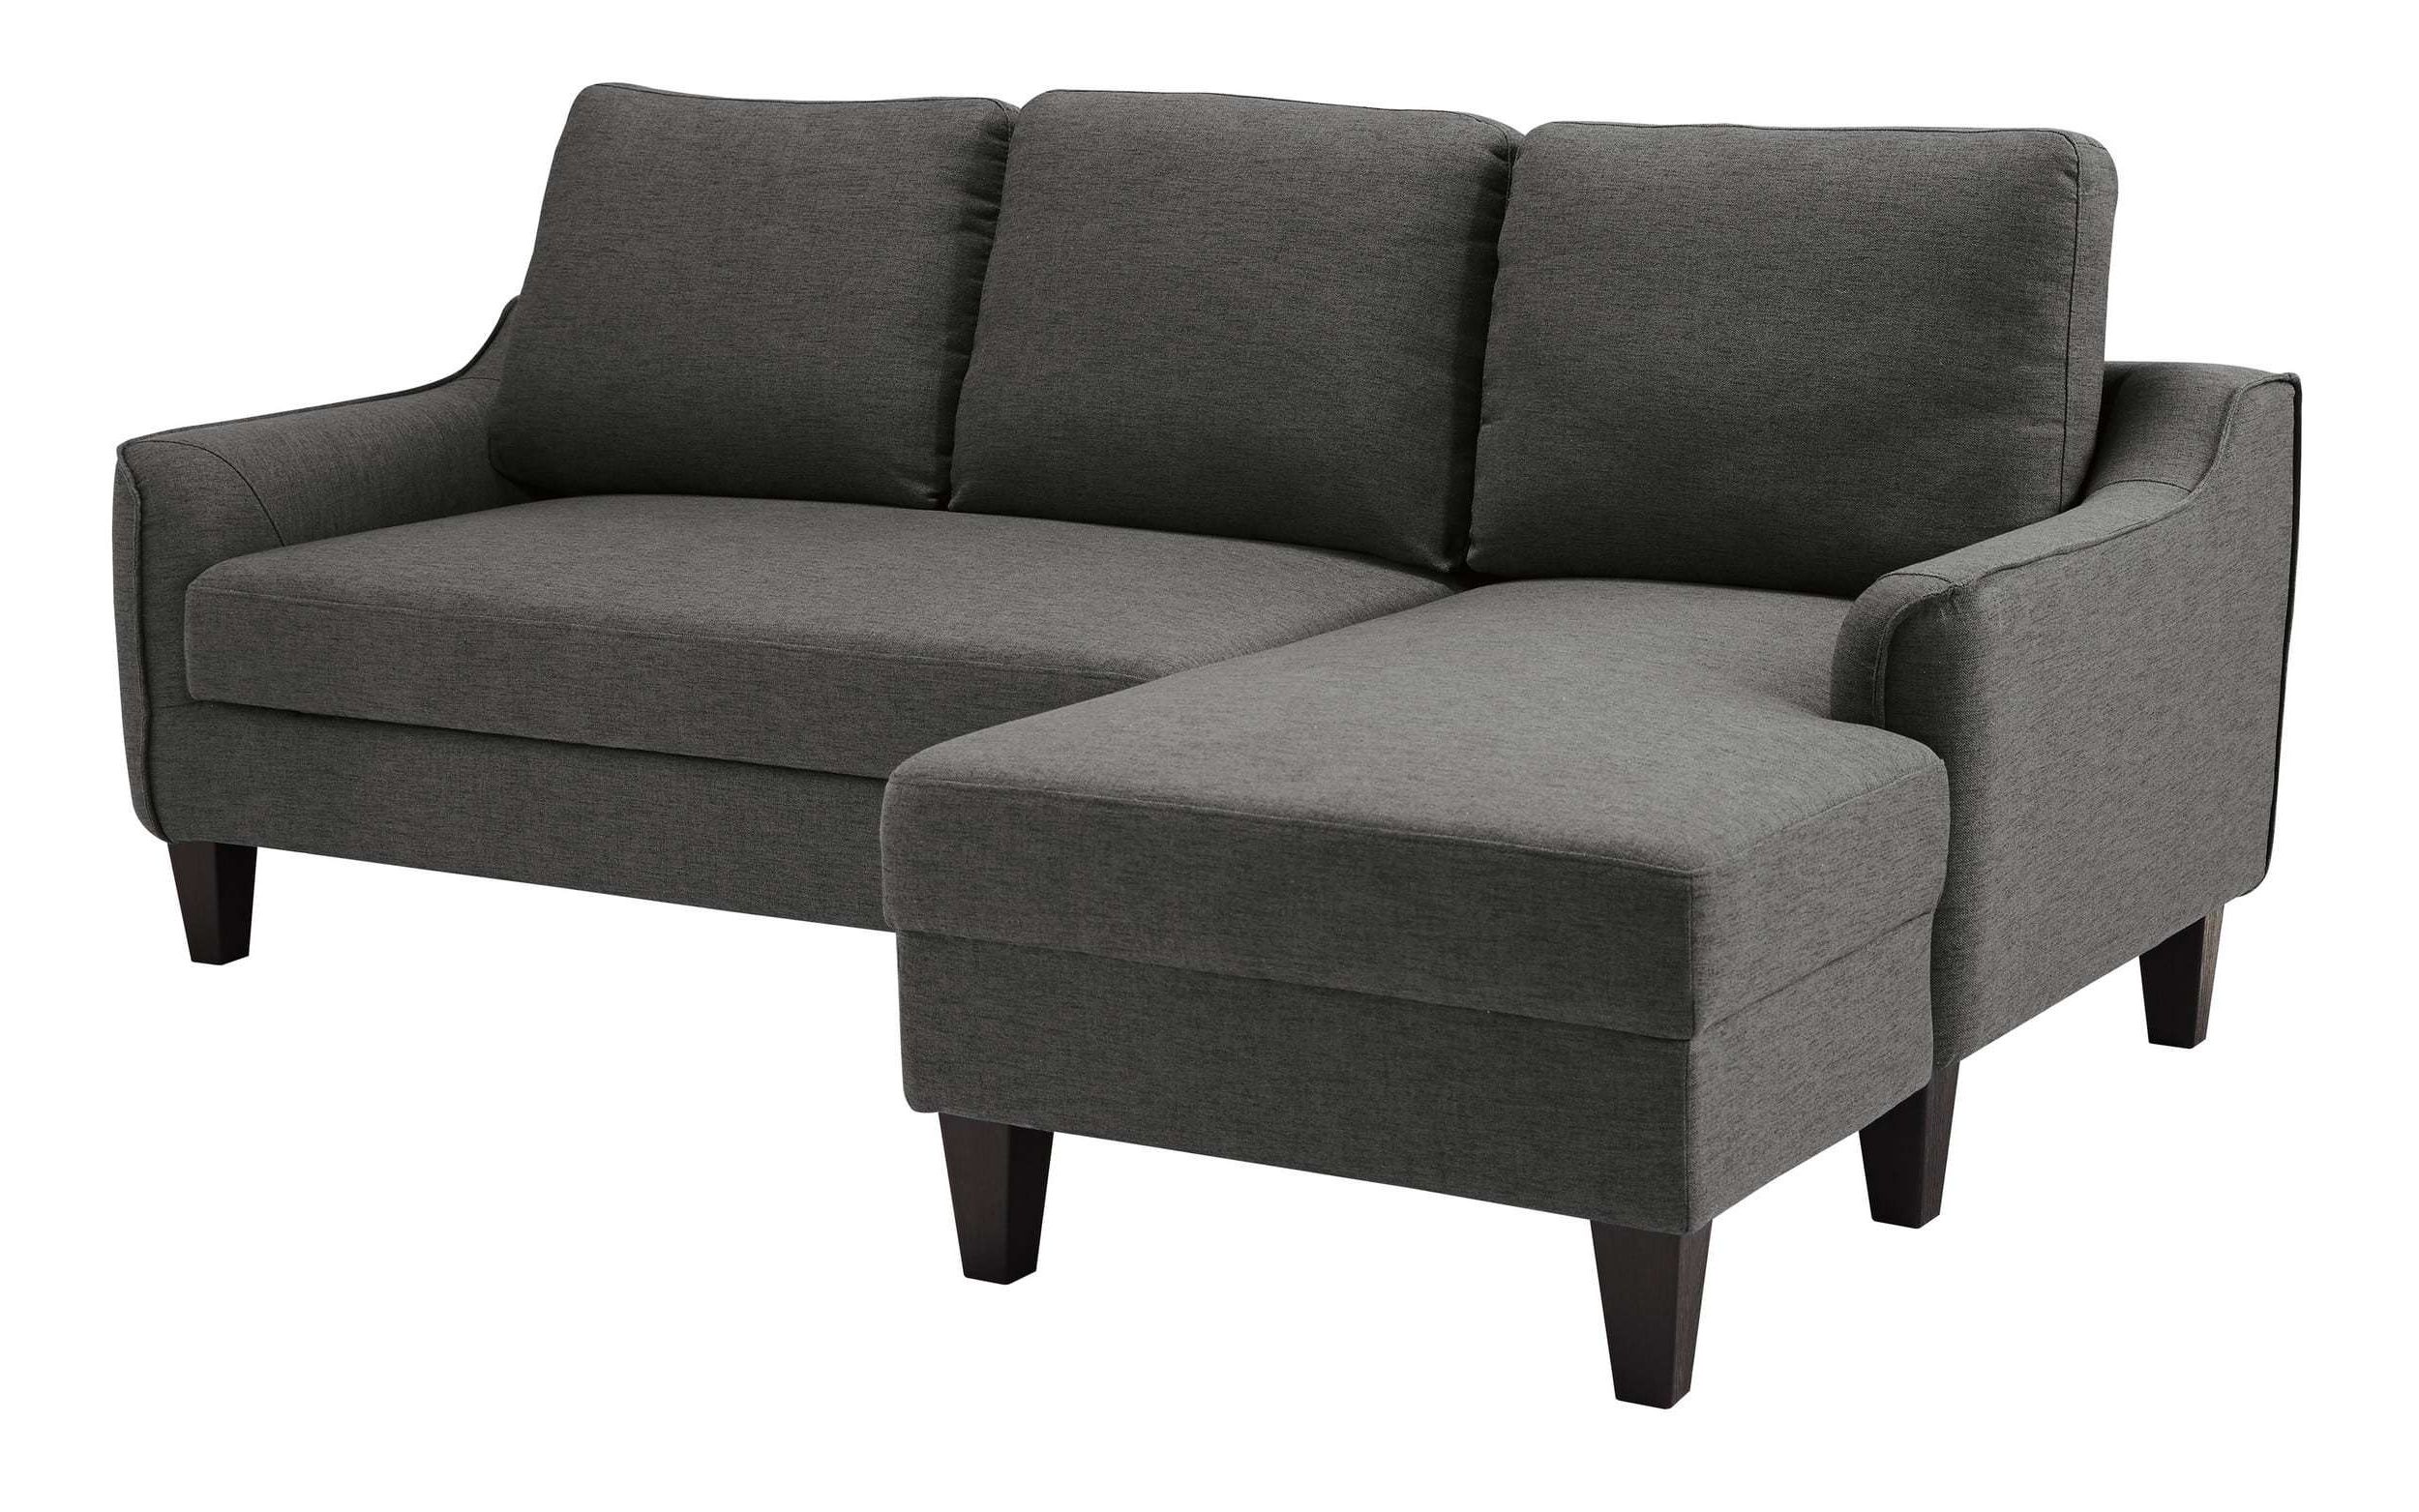 Egan Ii Cement Sofa Sectionals With Reversible Chaise With Regard To Most Current Sleek Egan Ii Cement Sofa Chaise Has Been Successfullyadded To Your (View 6 of 20)